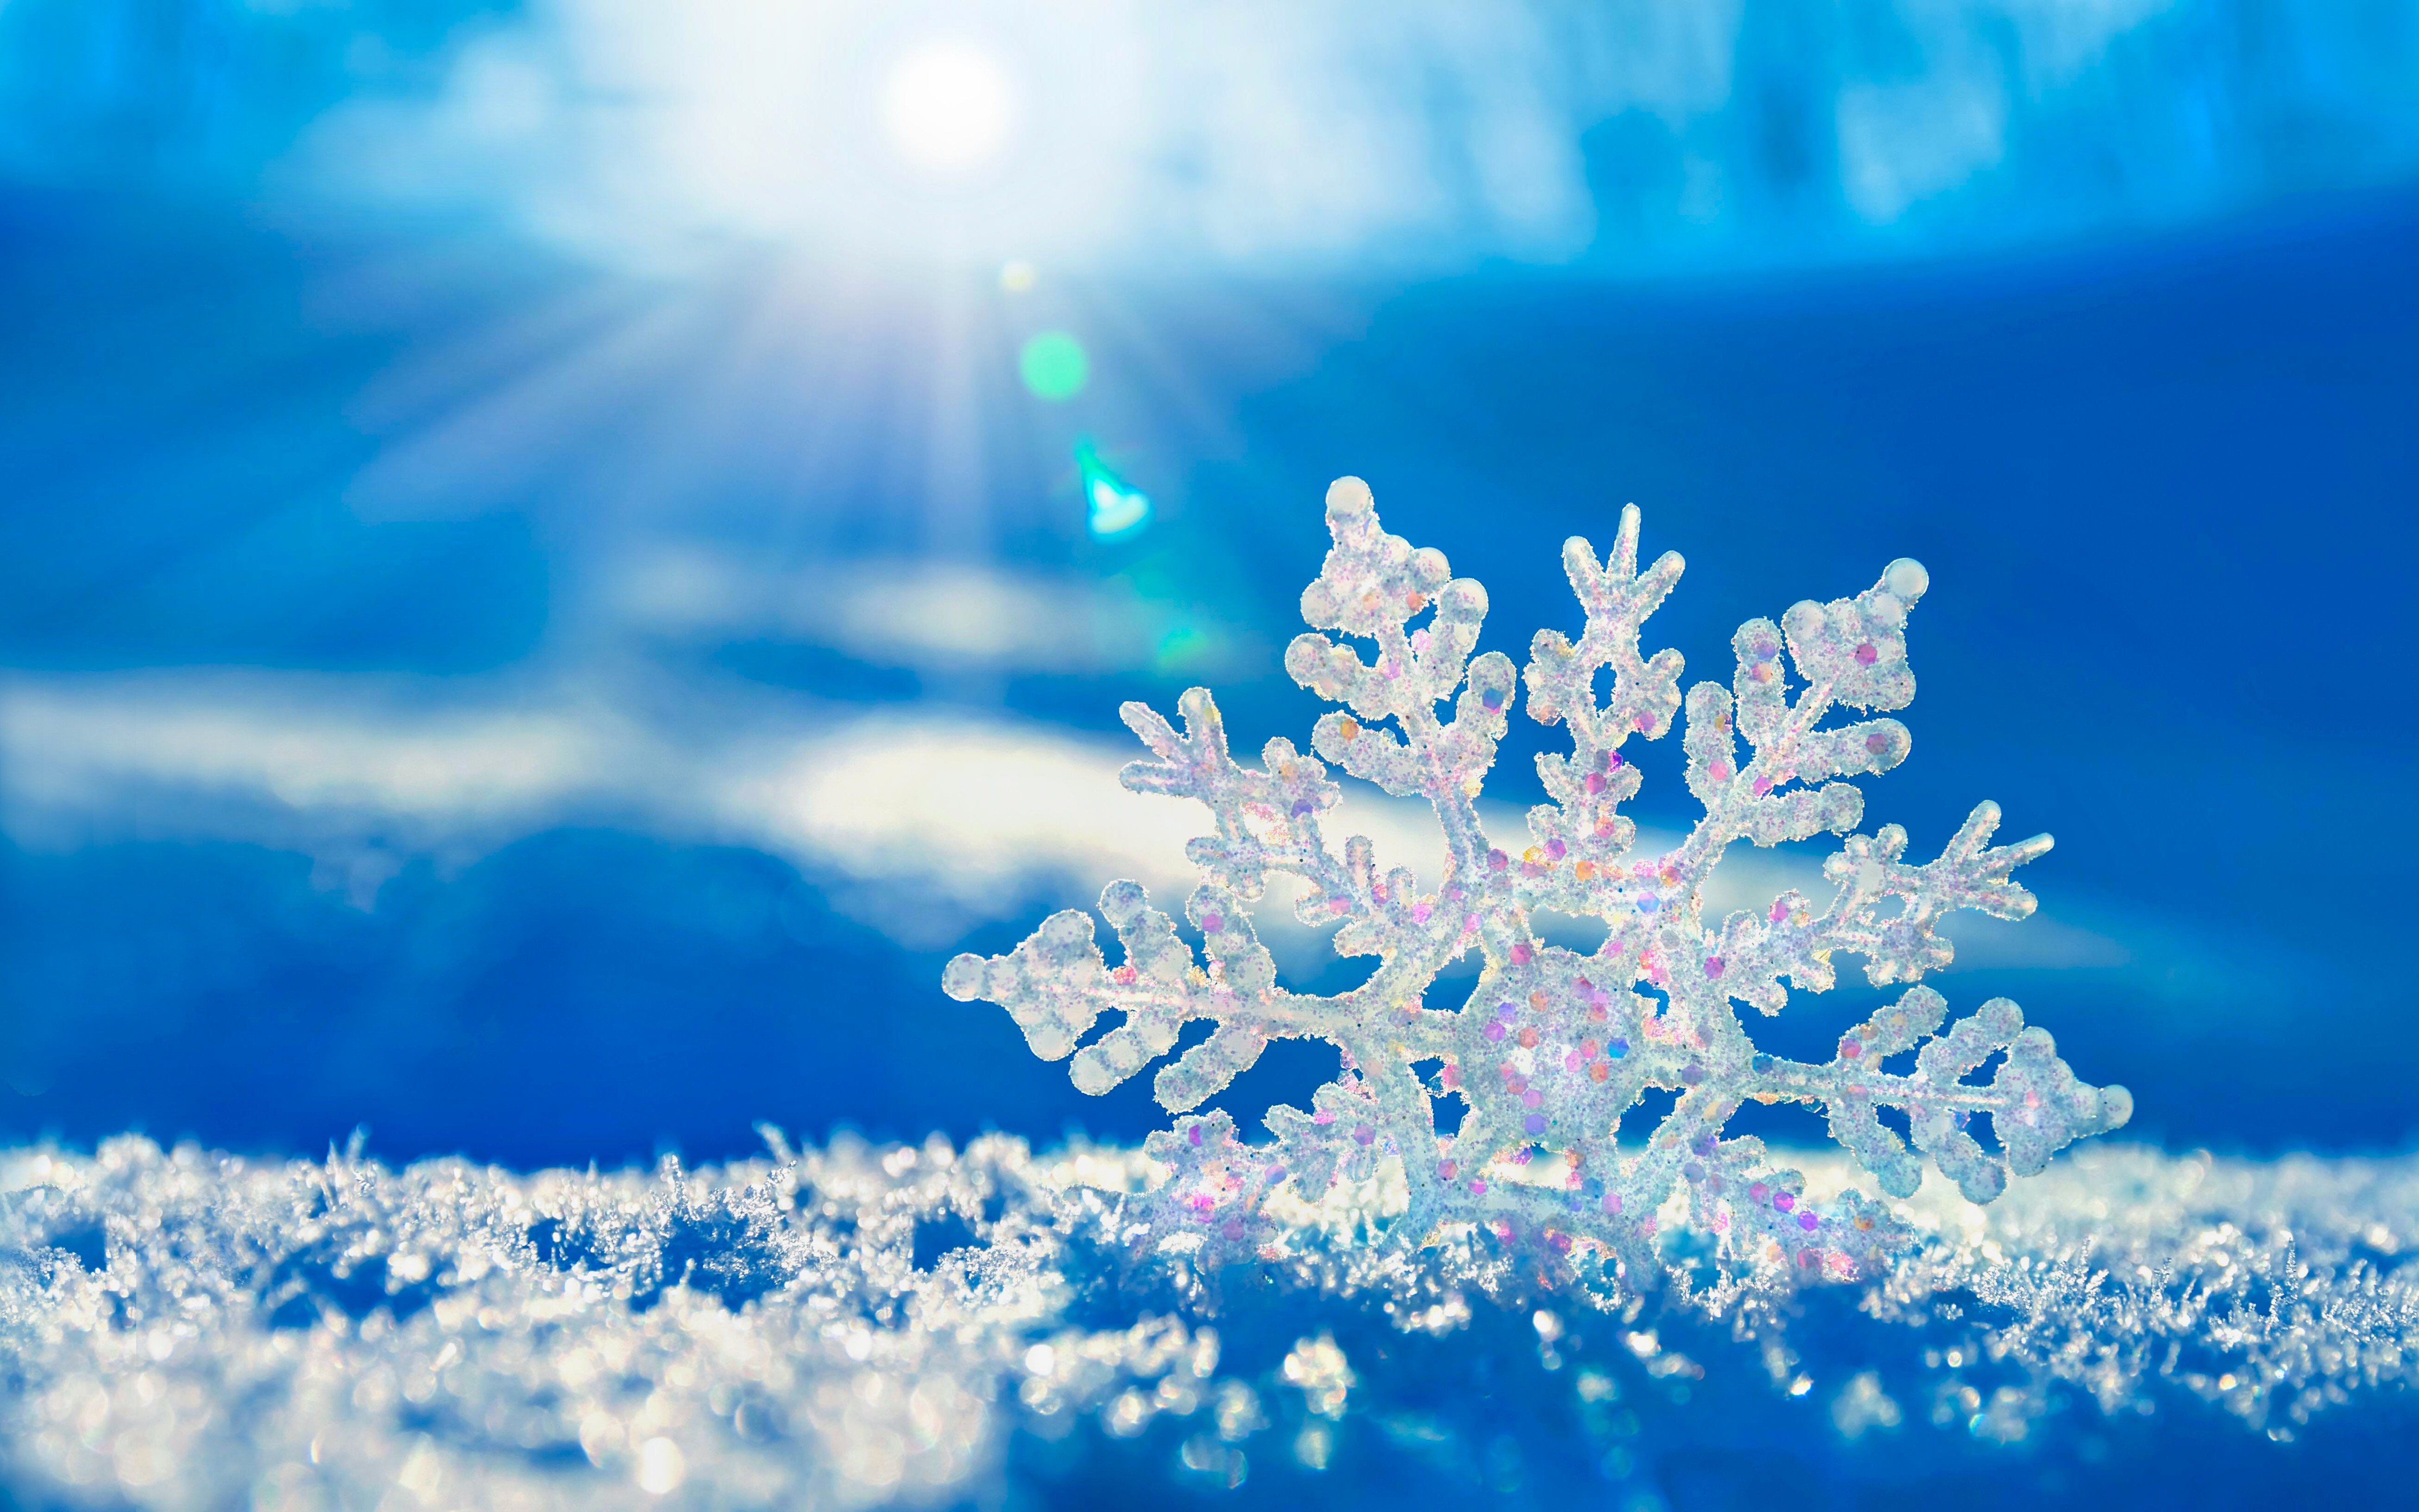 Snowflake hd papers and backgrounds